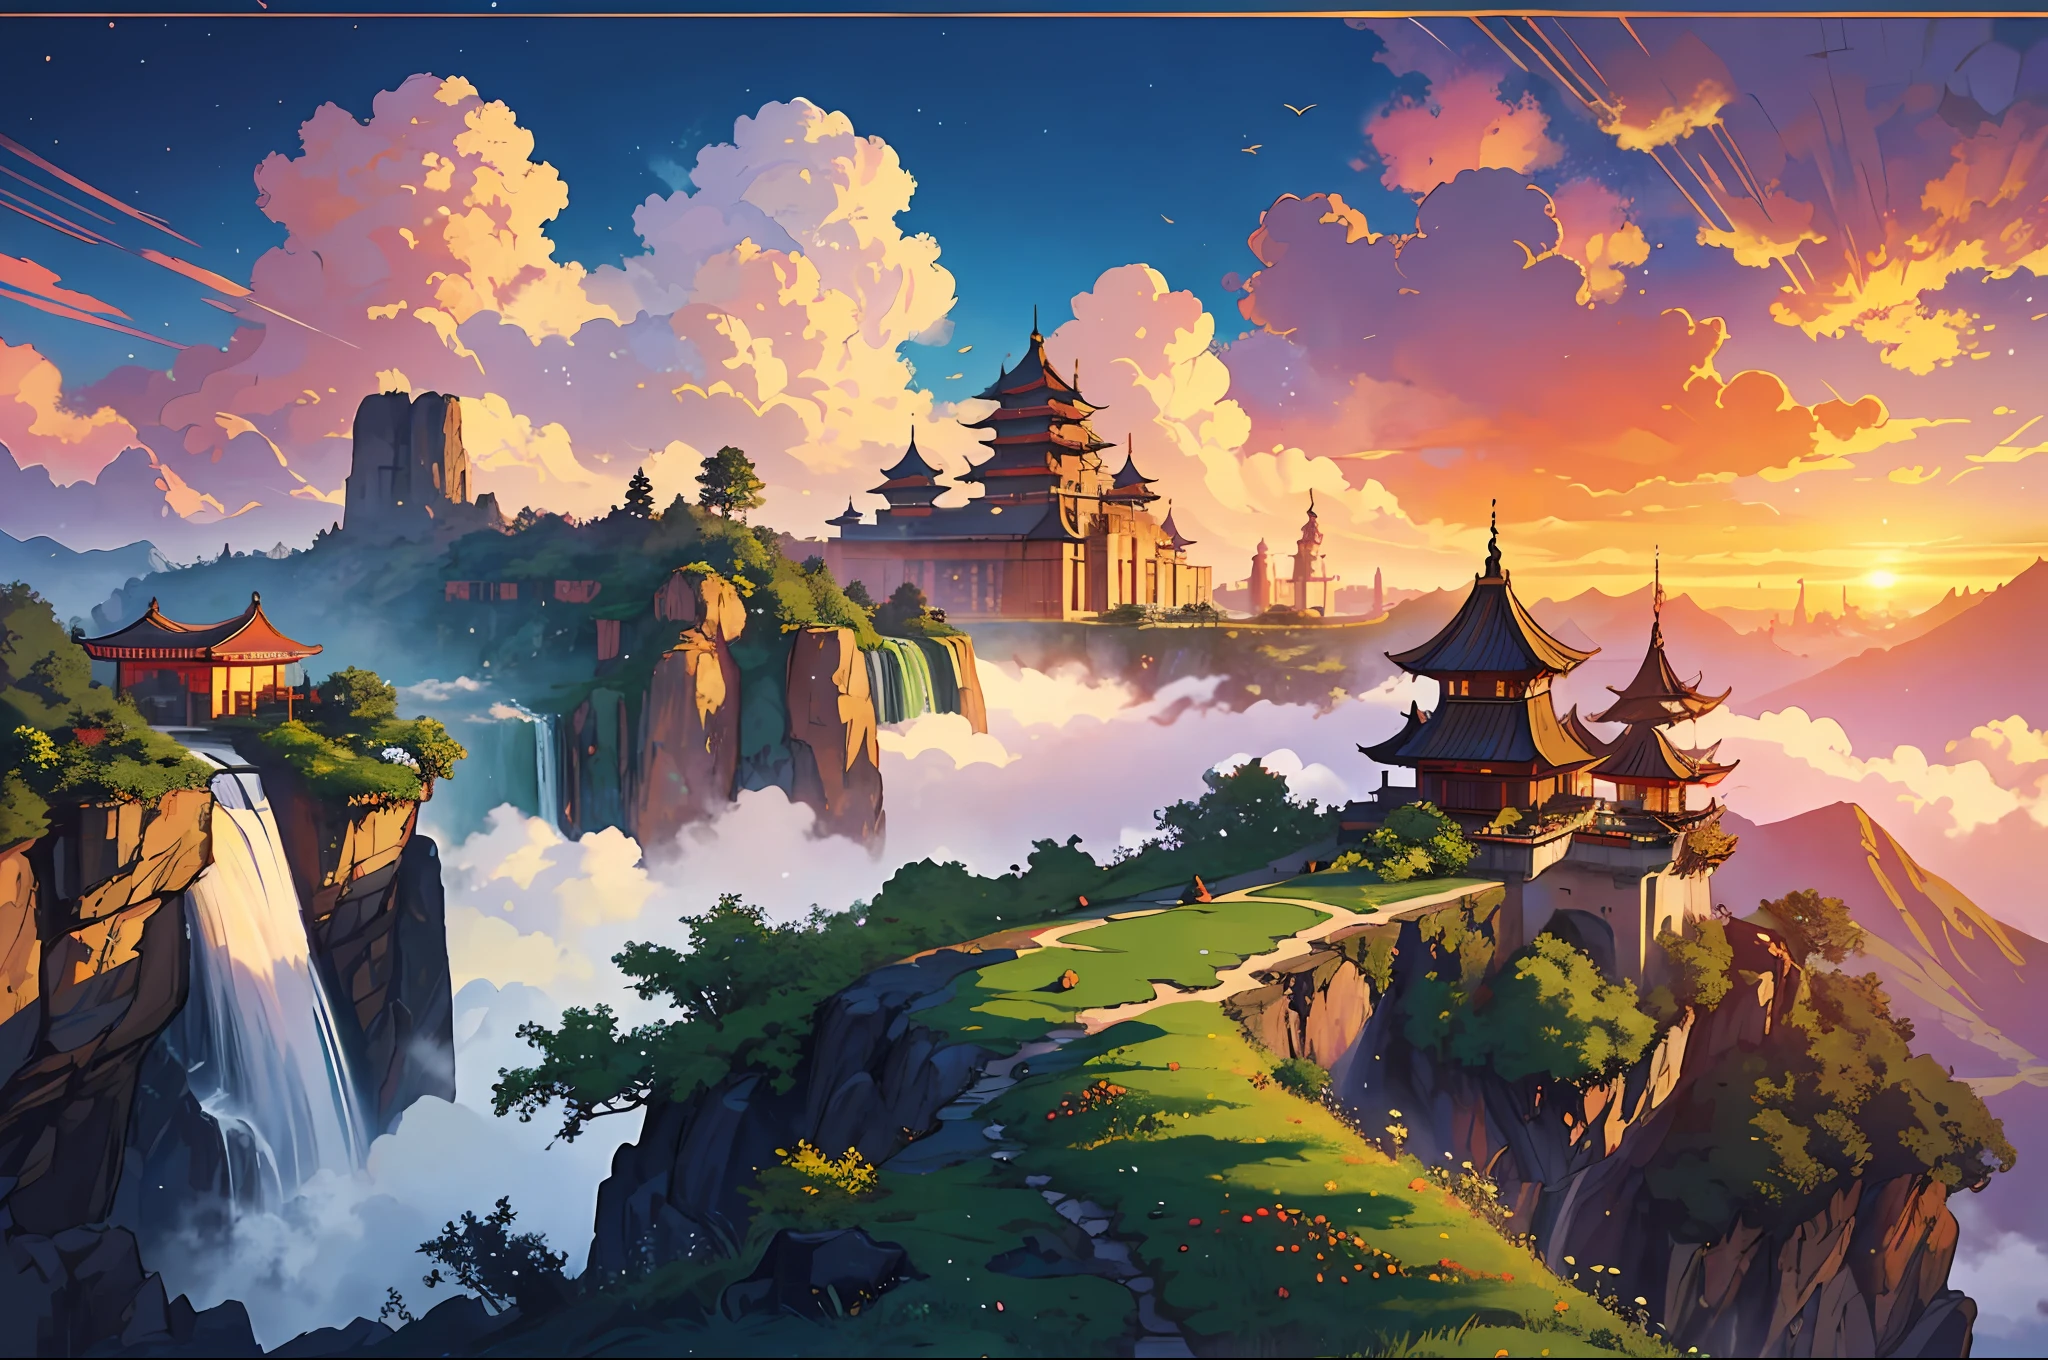 Craft a vivid description of a majestic chinese kingdom nestled among the clouds in a breathtaking fantasy landscape. Envision cascading waterfalls of iridescent mist, opulent floating palaces adorned with intricate spires, and ethereal gardens where vibrant, otherworldly flora flourishes in the soft glow of an eternal sunset